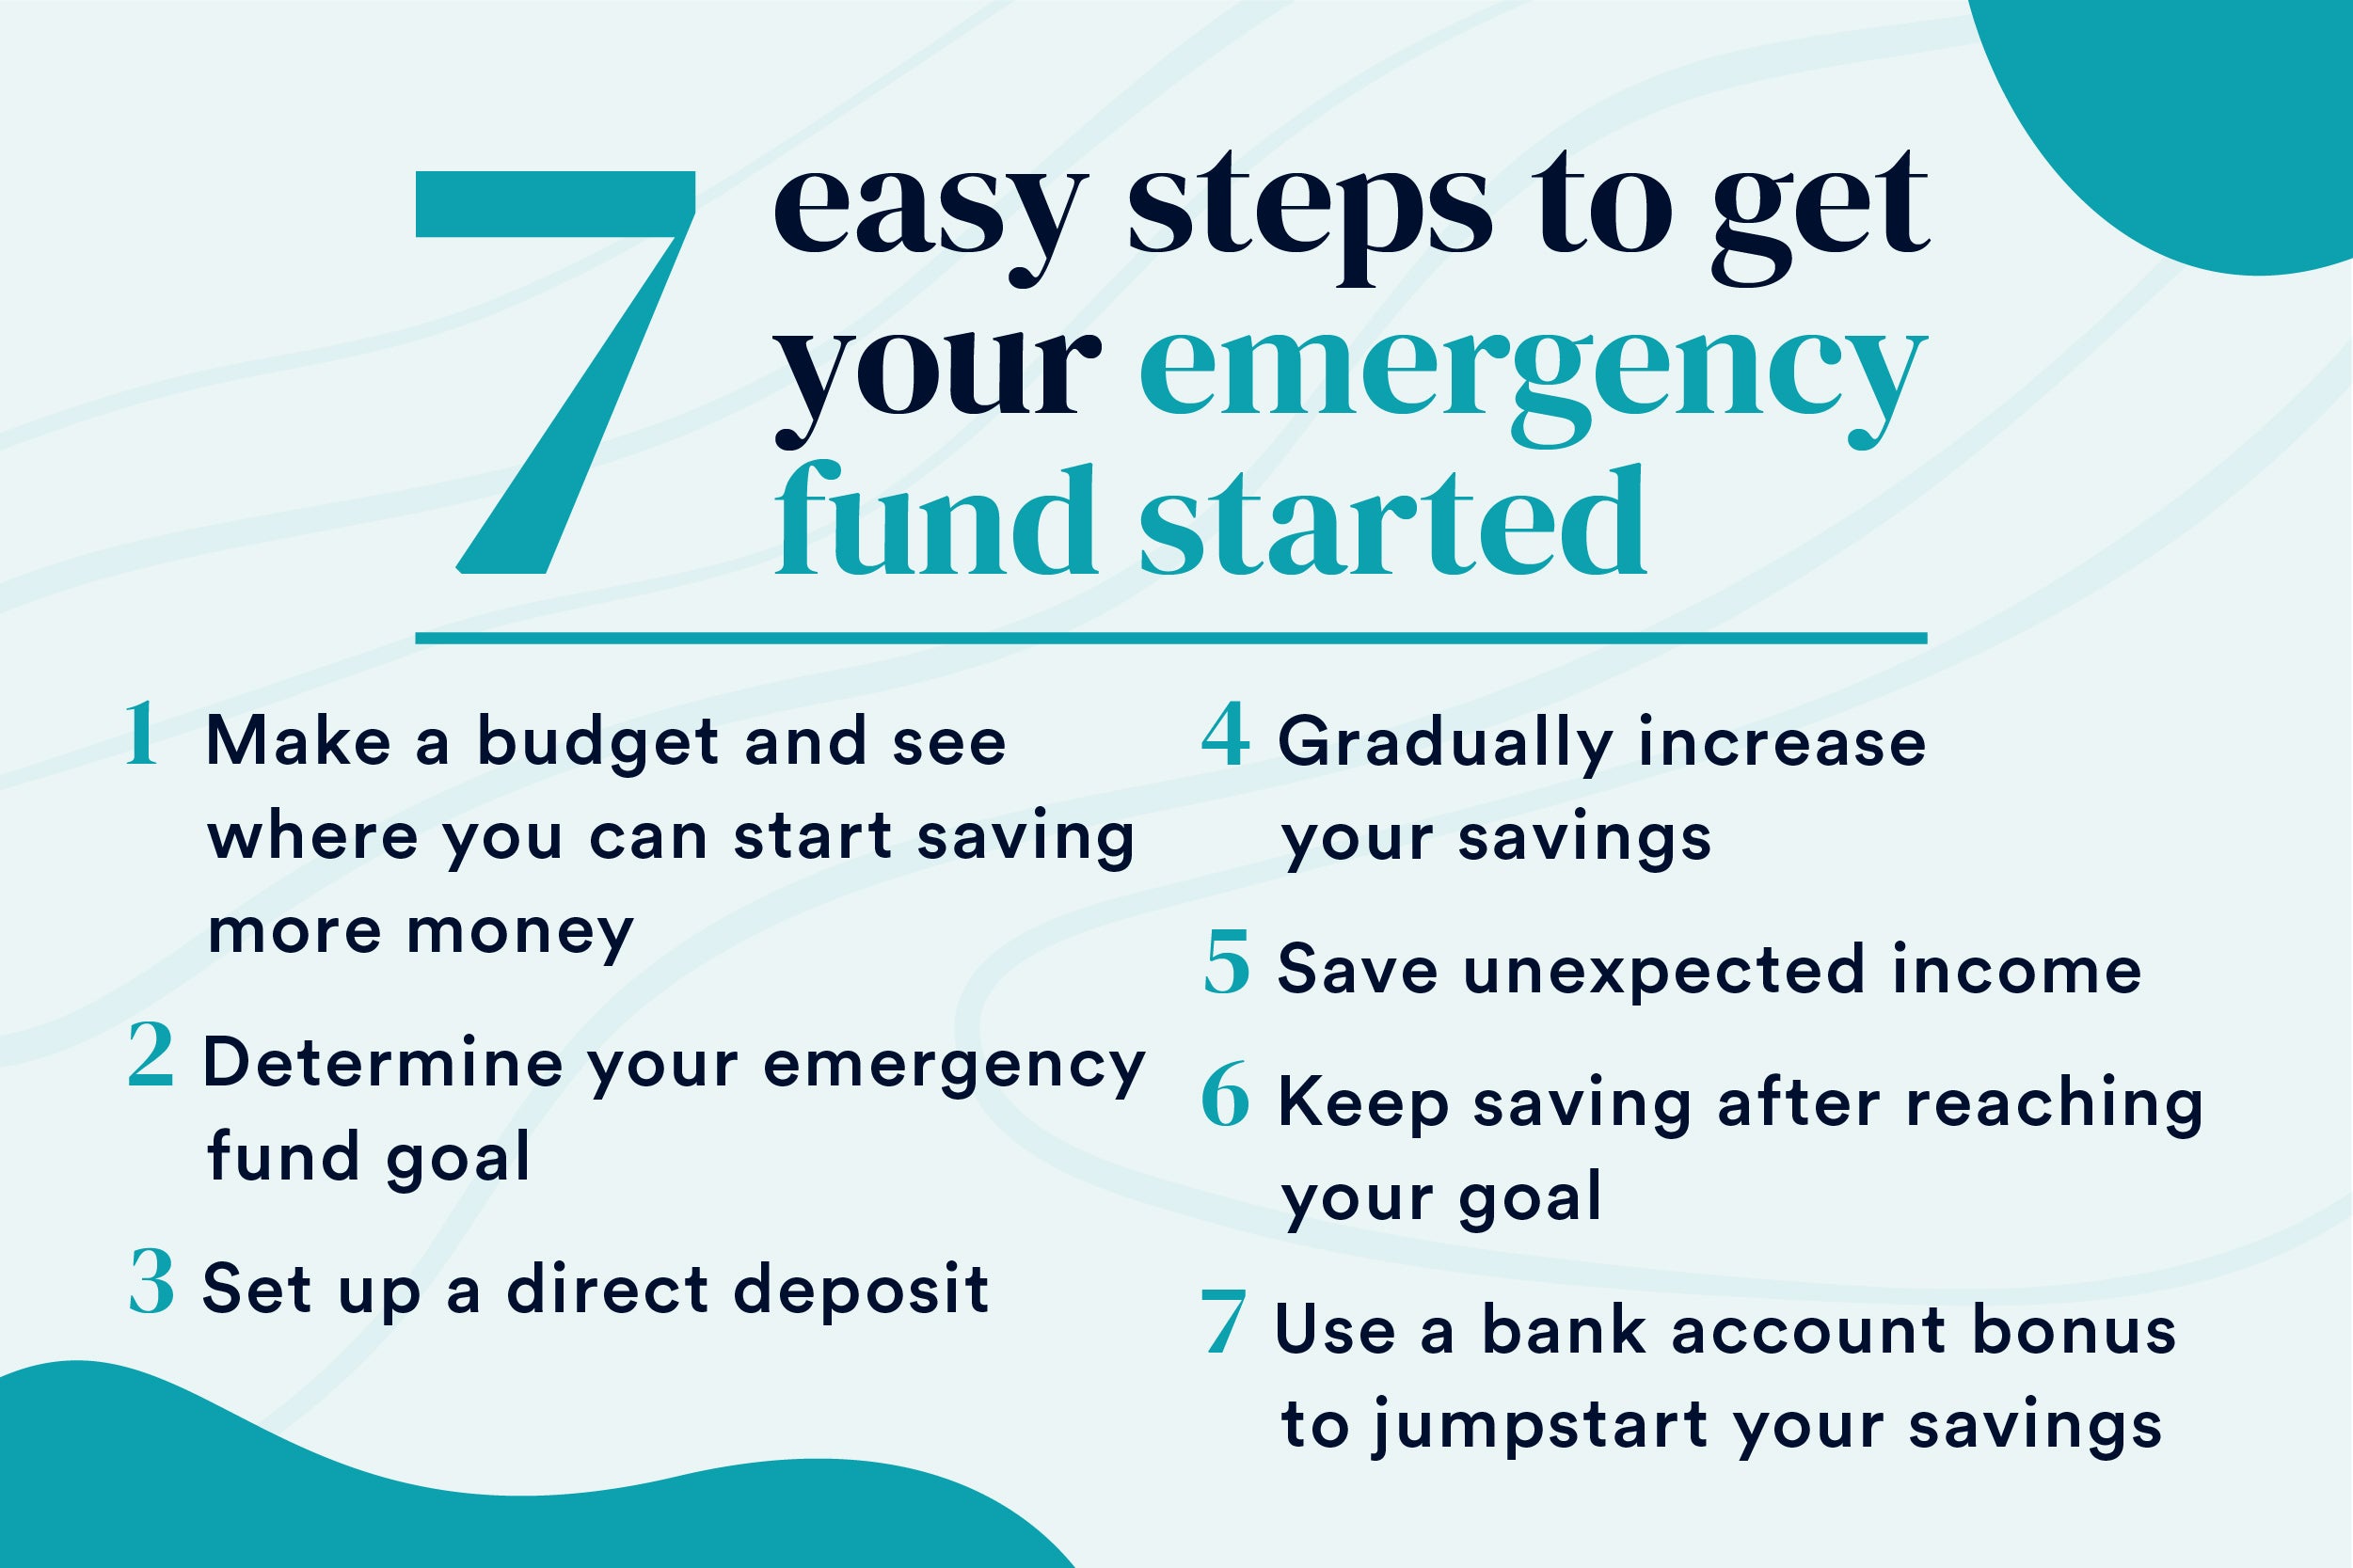 7 budgeting tips to help families save money